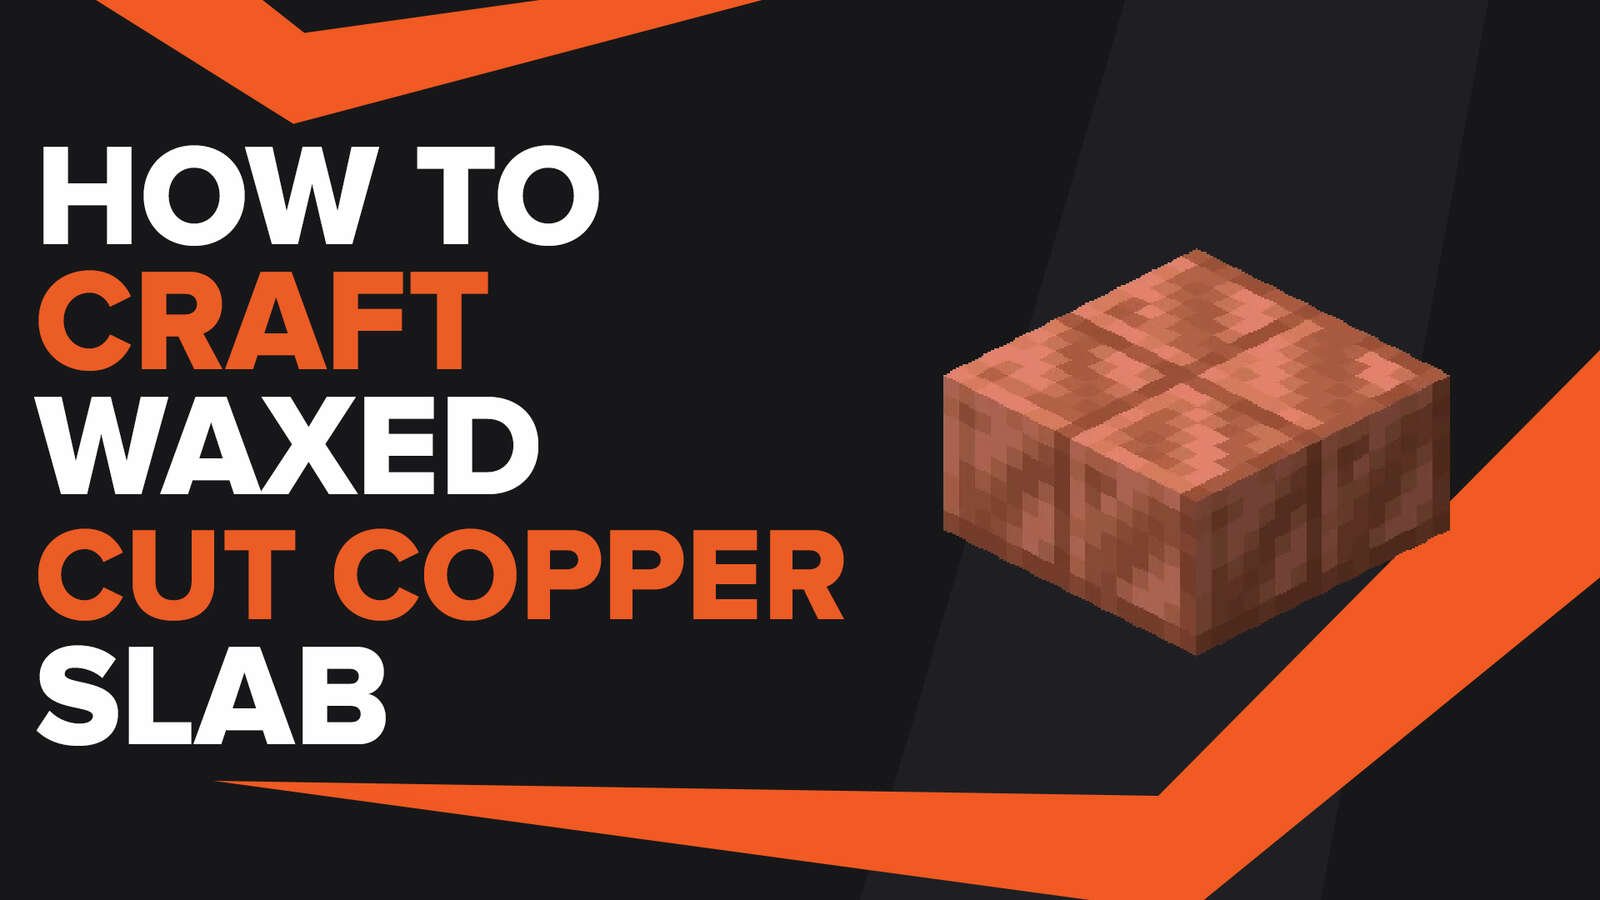 How To Make Waxed Cut Copper Slab In Minecraft